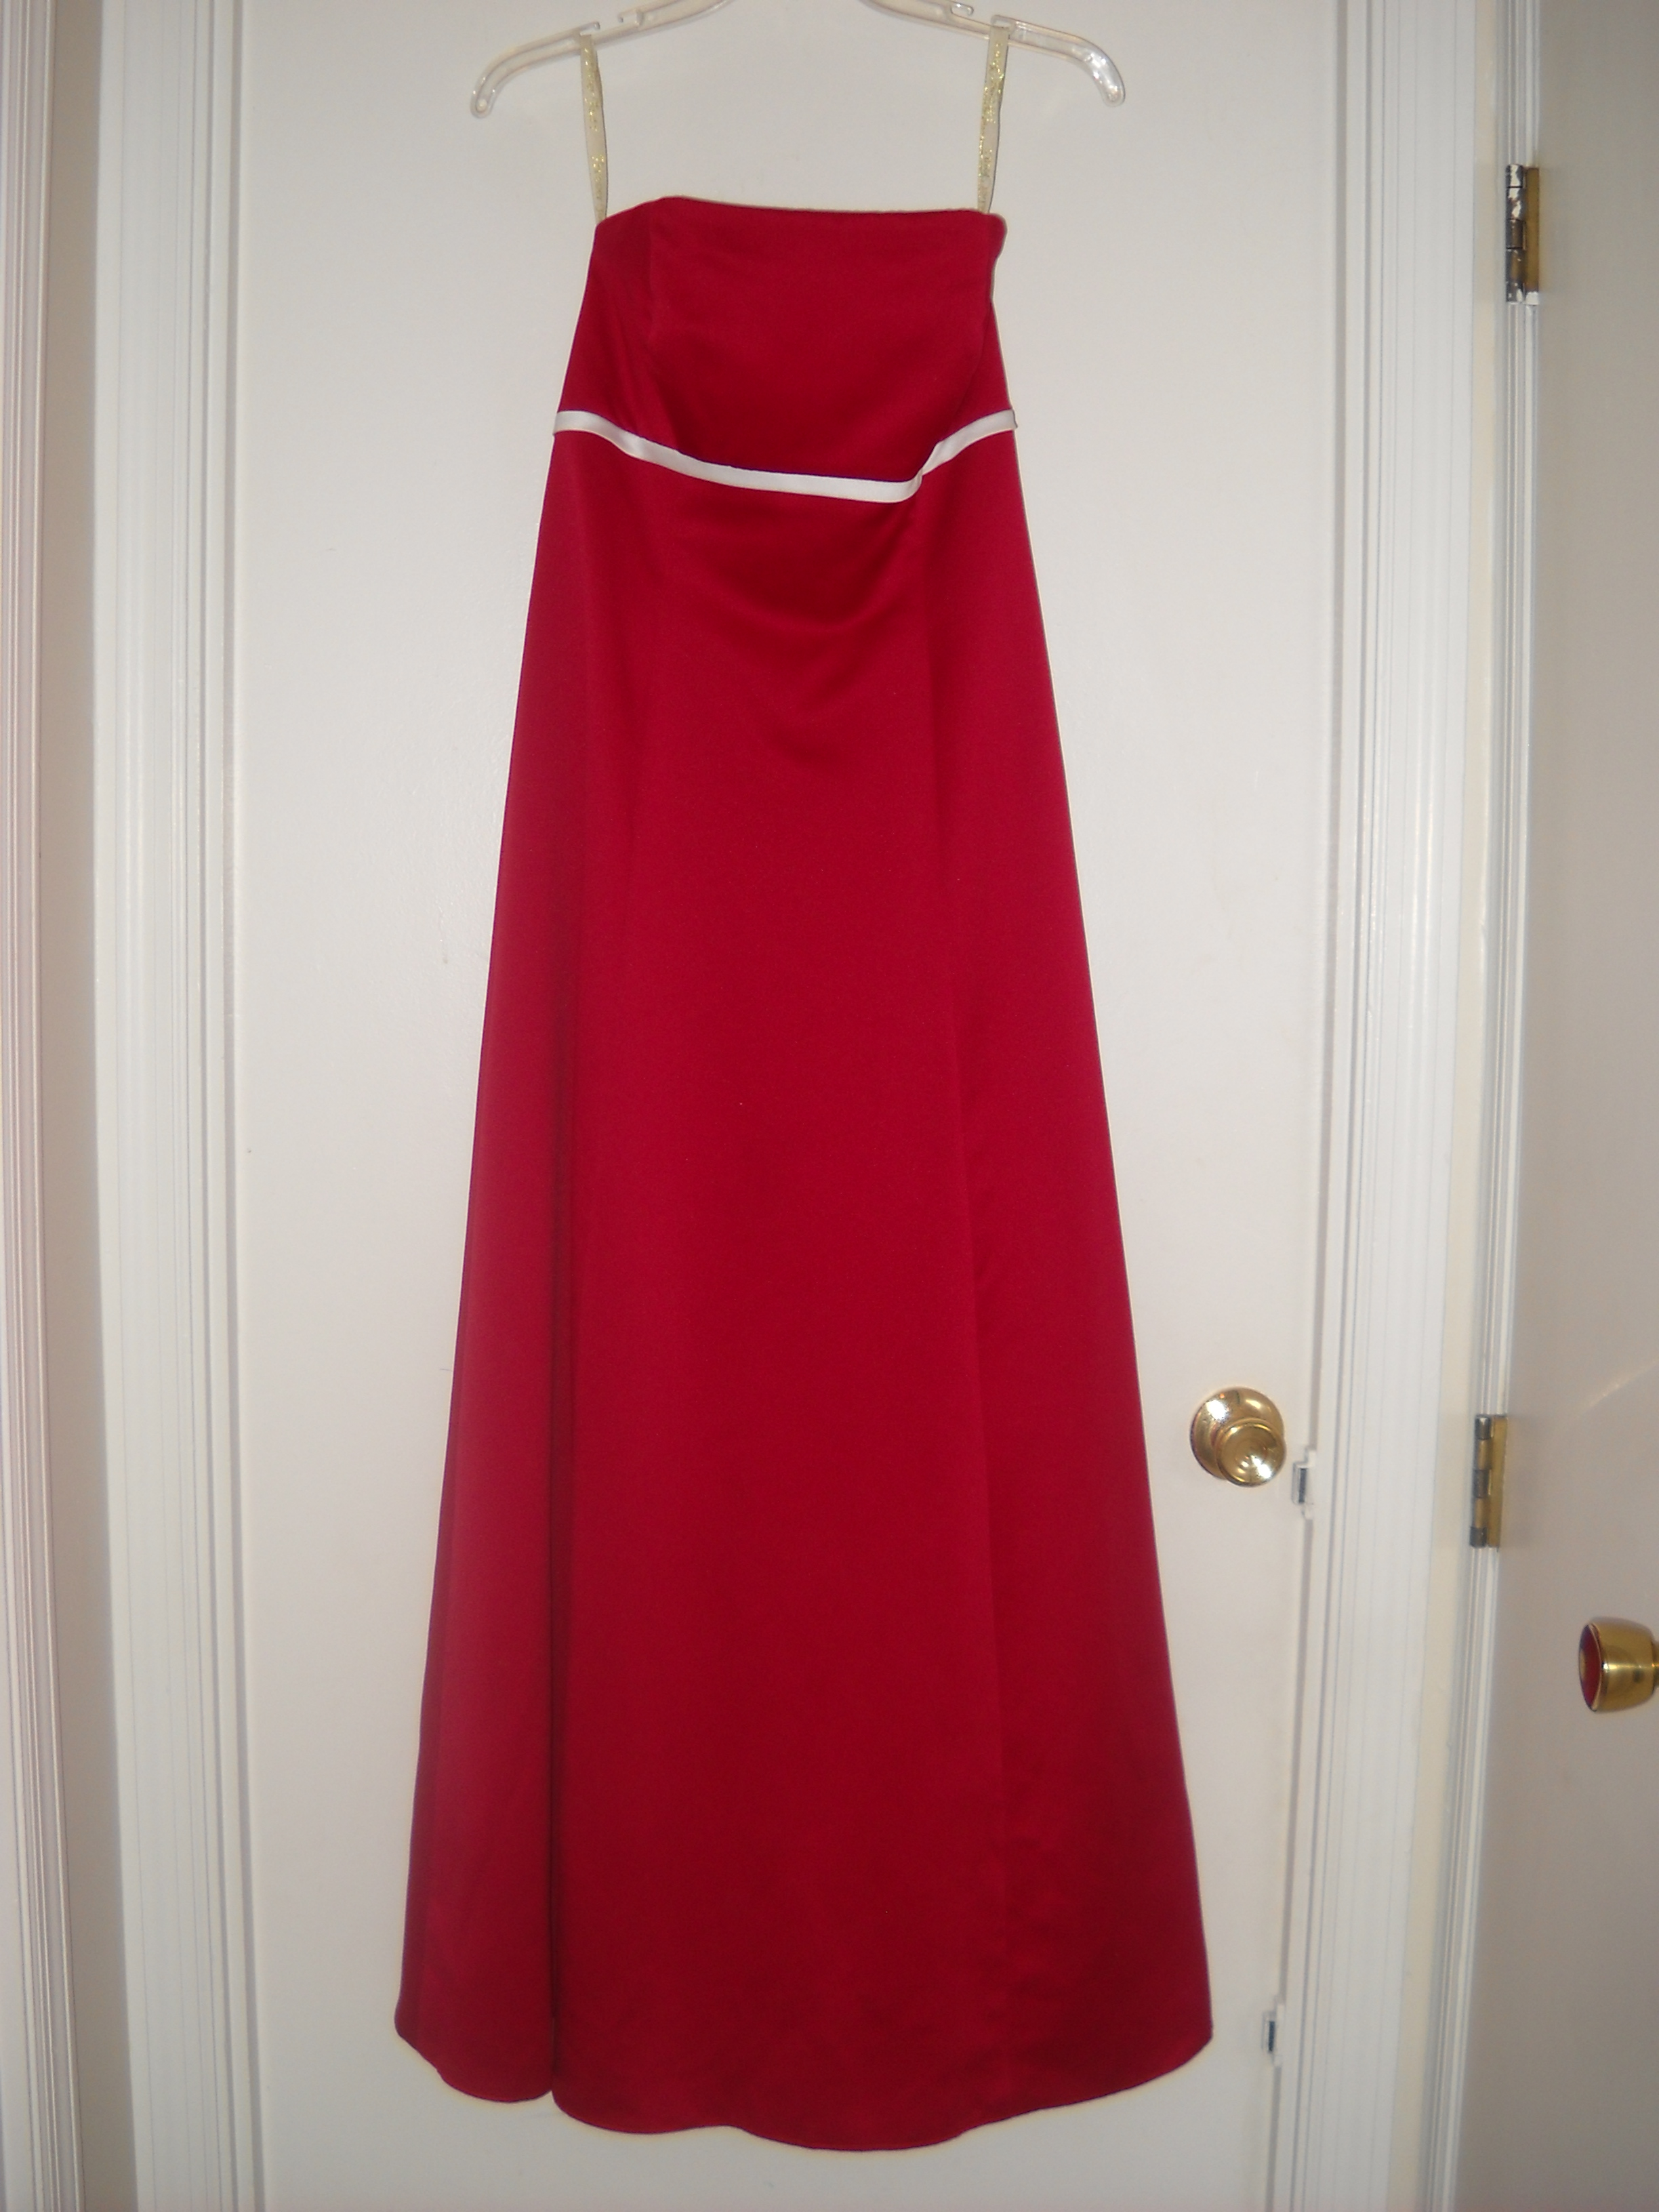 Size 8 Prom/Homecoming/Ball Gown